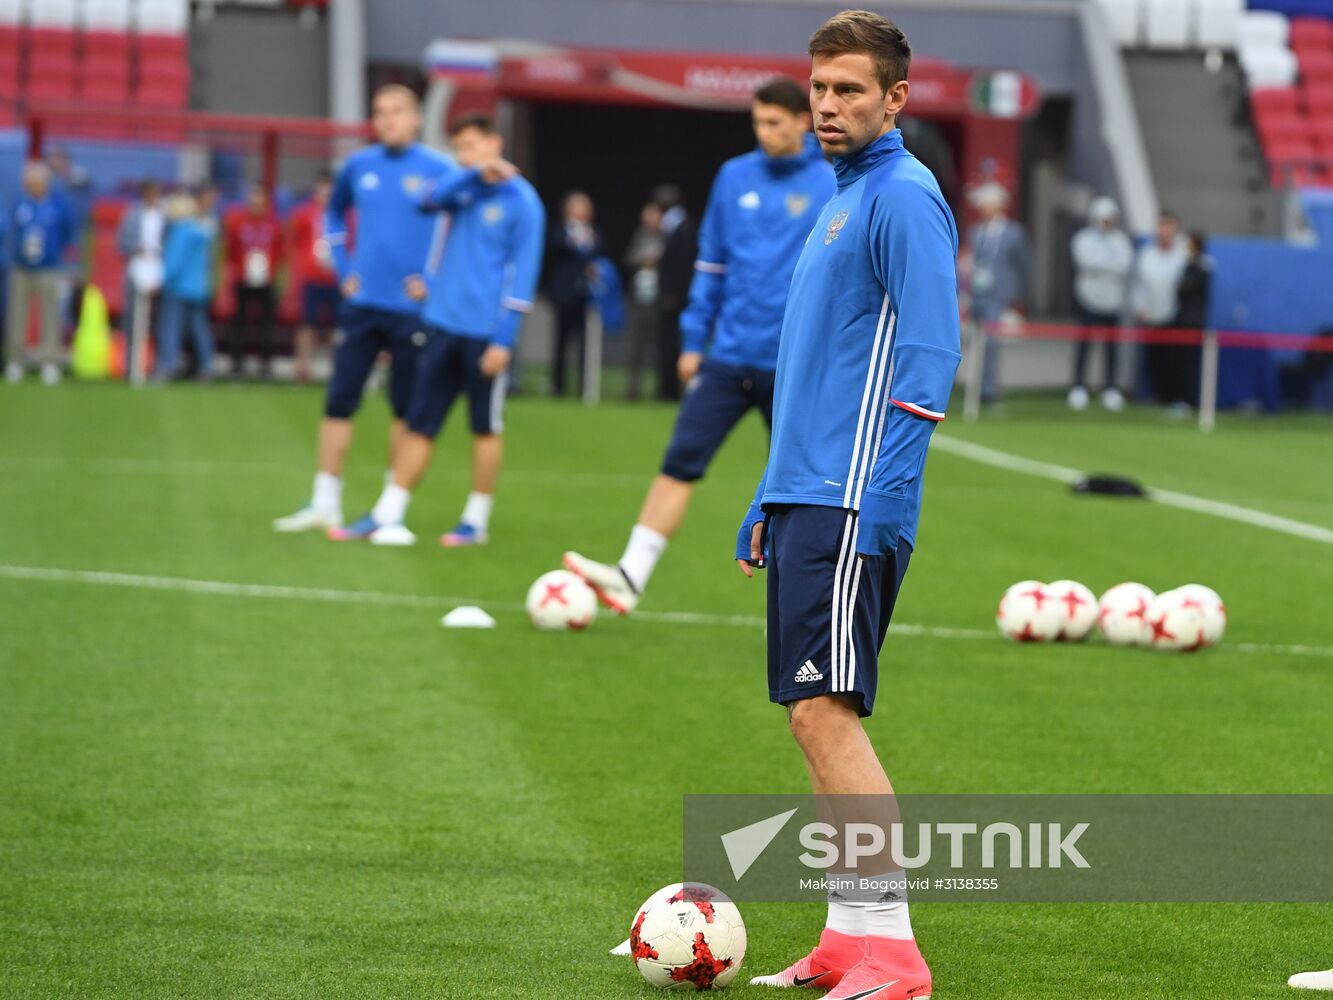 Football. 2017 FIFA Confederations Cup. Training session of Russia’s national team